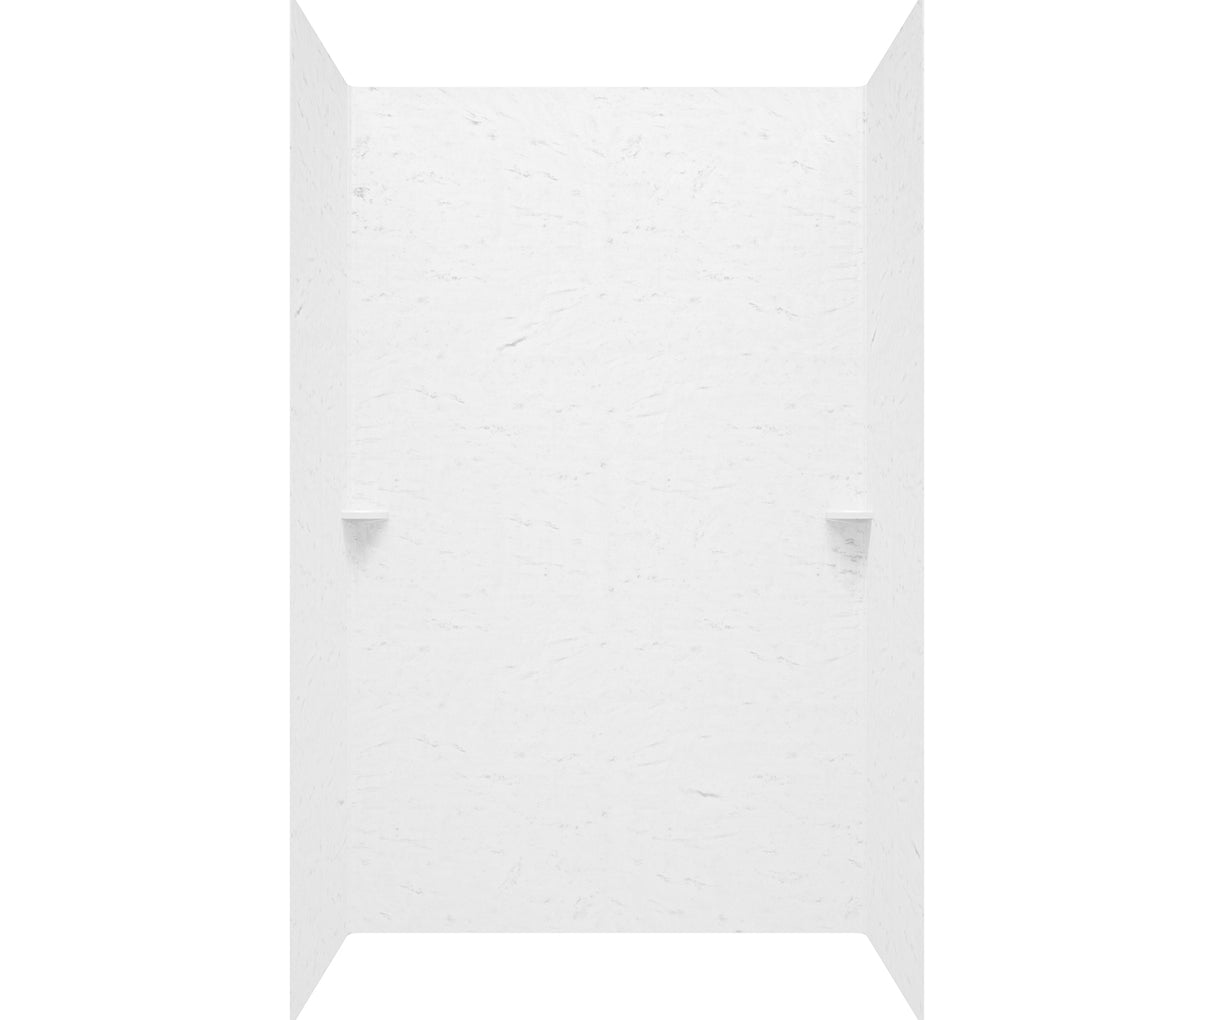 Swanstone SK-364896 36 x 48 x 96 Swanstone Smooth Glue up Shower Wall Kit in Carrara SK364896.221